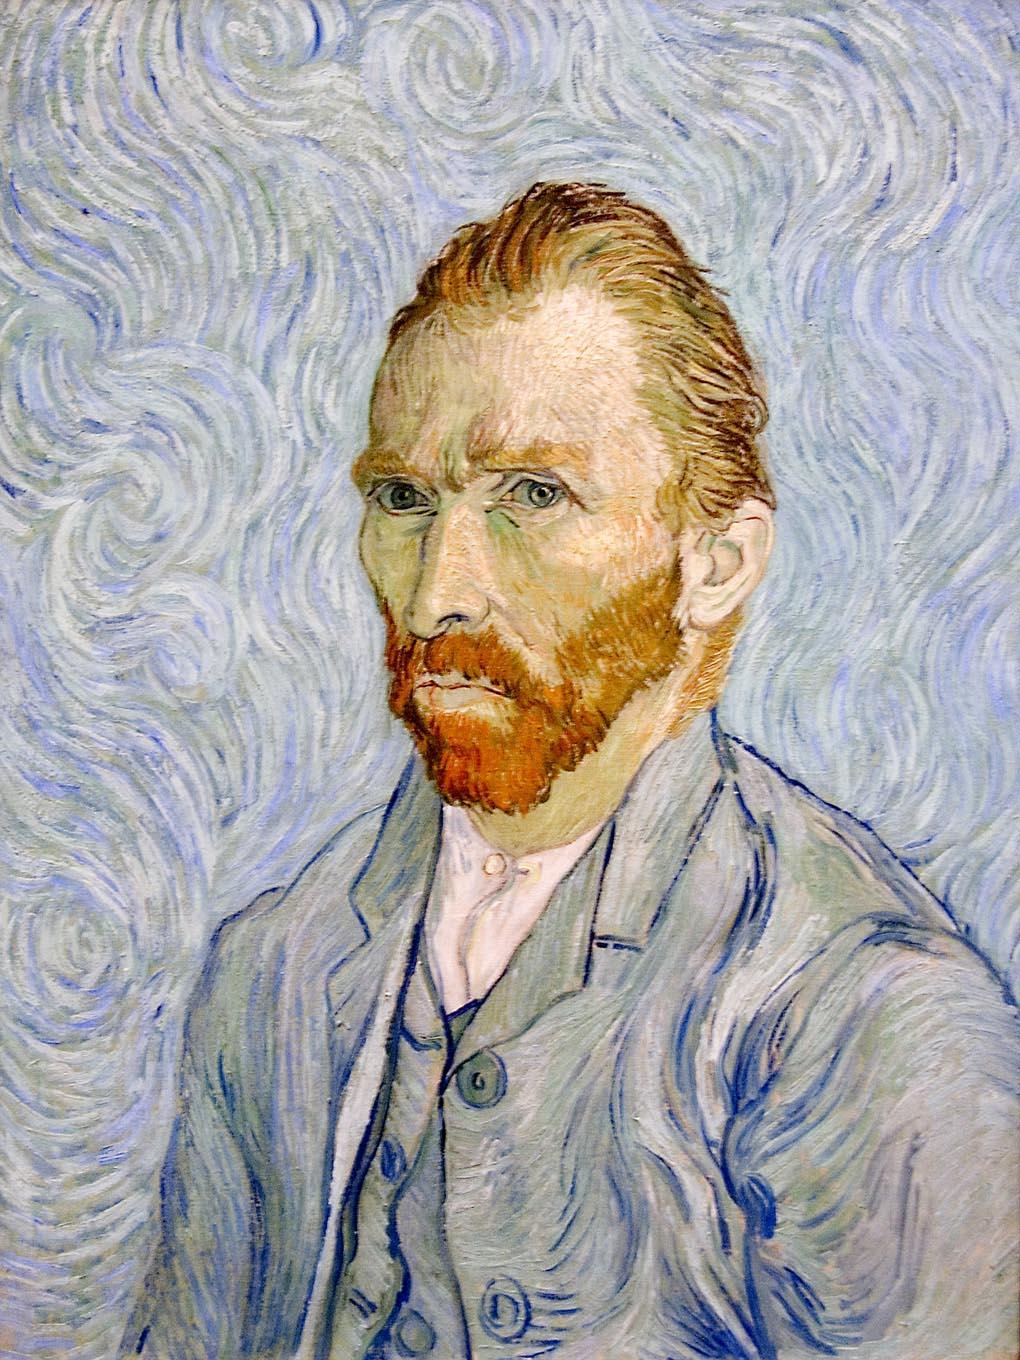 Vincent Van Gogh Troubled life Mental illness Drank excessively One girlfriend drowned herself, the other overdosed Father had heart attack Very poor lived on bread, coffee and tobacco Had painful